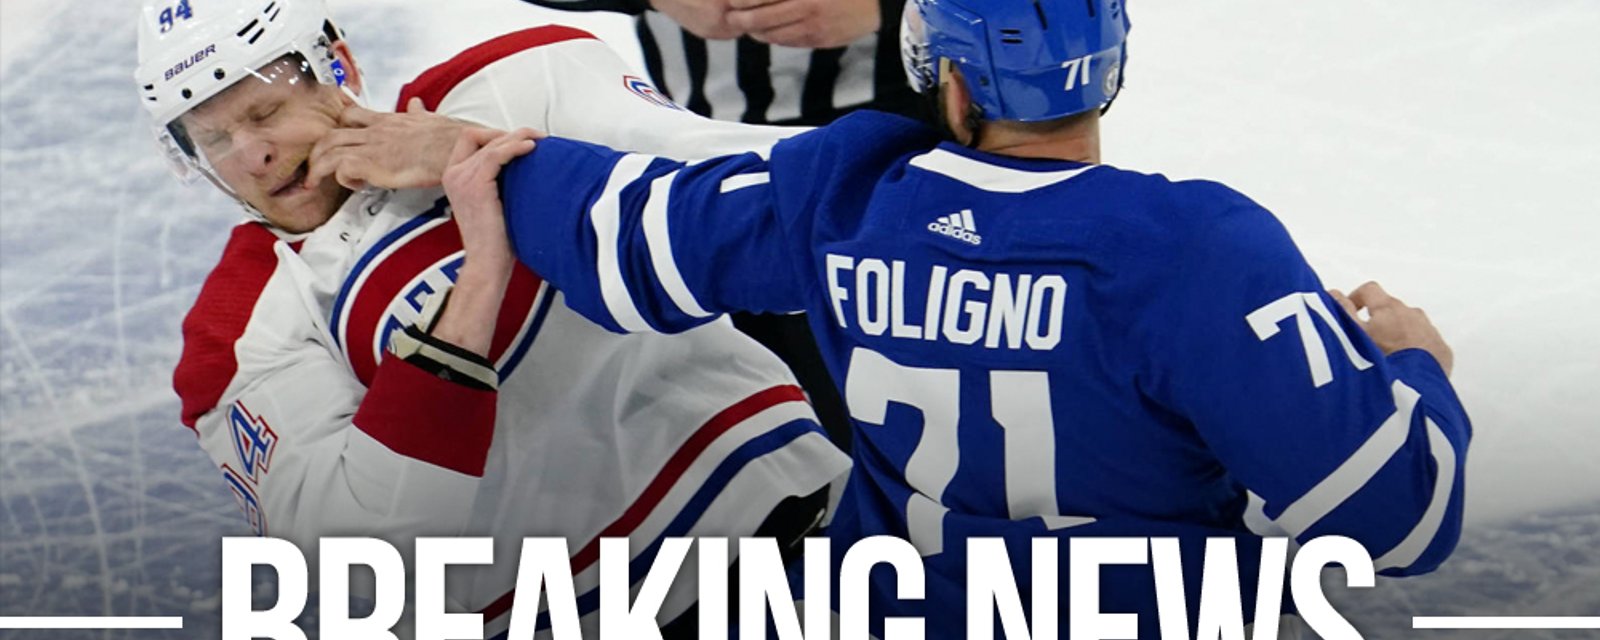 Leafs pull Foligno from the lineup minutes before Game 3